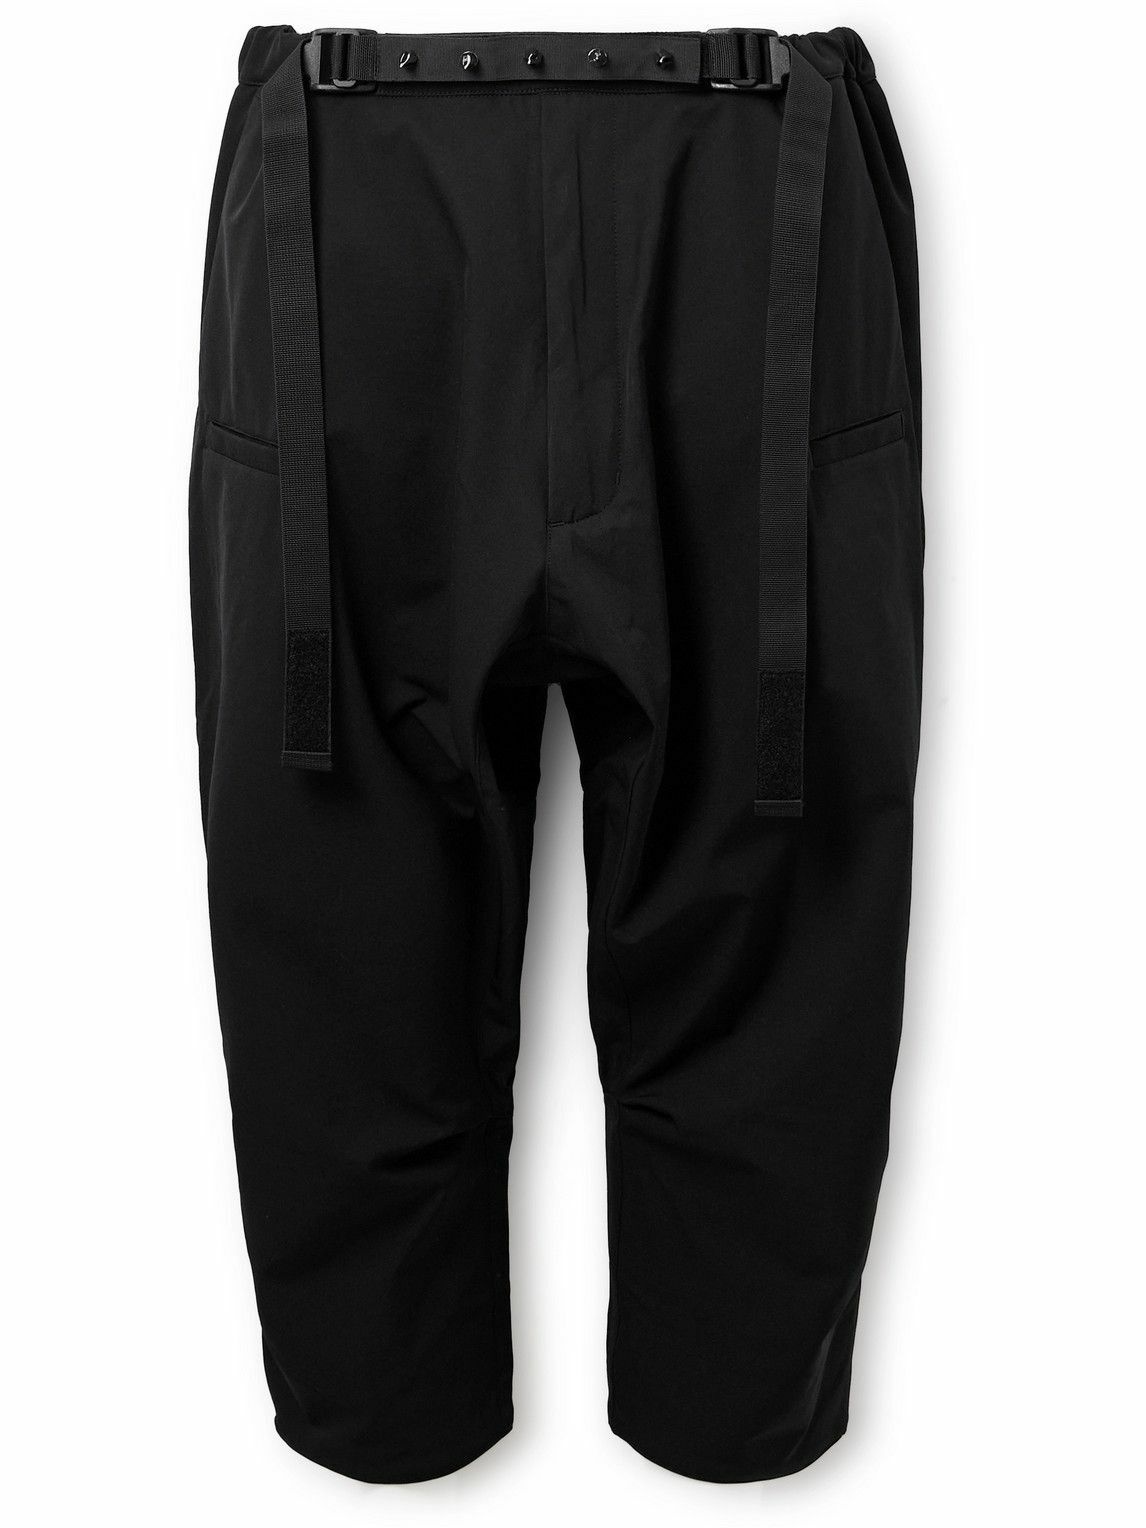 Photo: ACRONYM - P17-DS Cropped Spiked Belted schoeller® Dryskin™ Trousers - Black